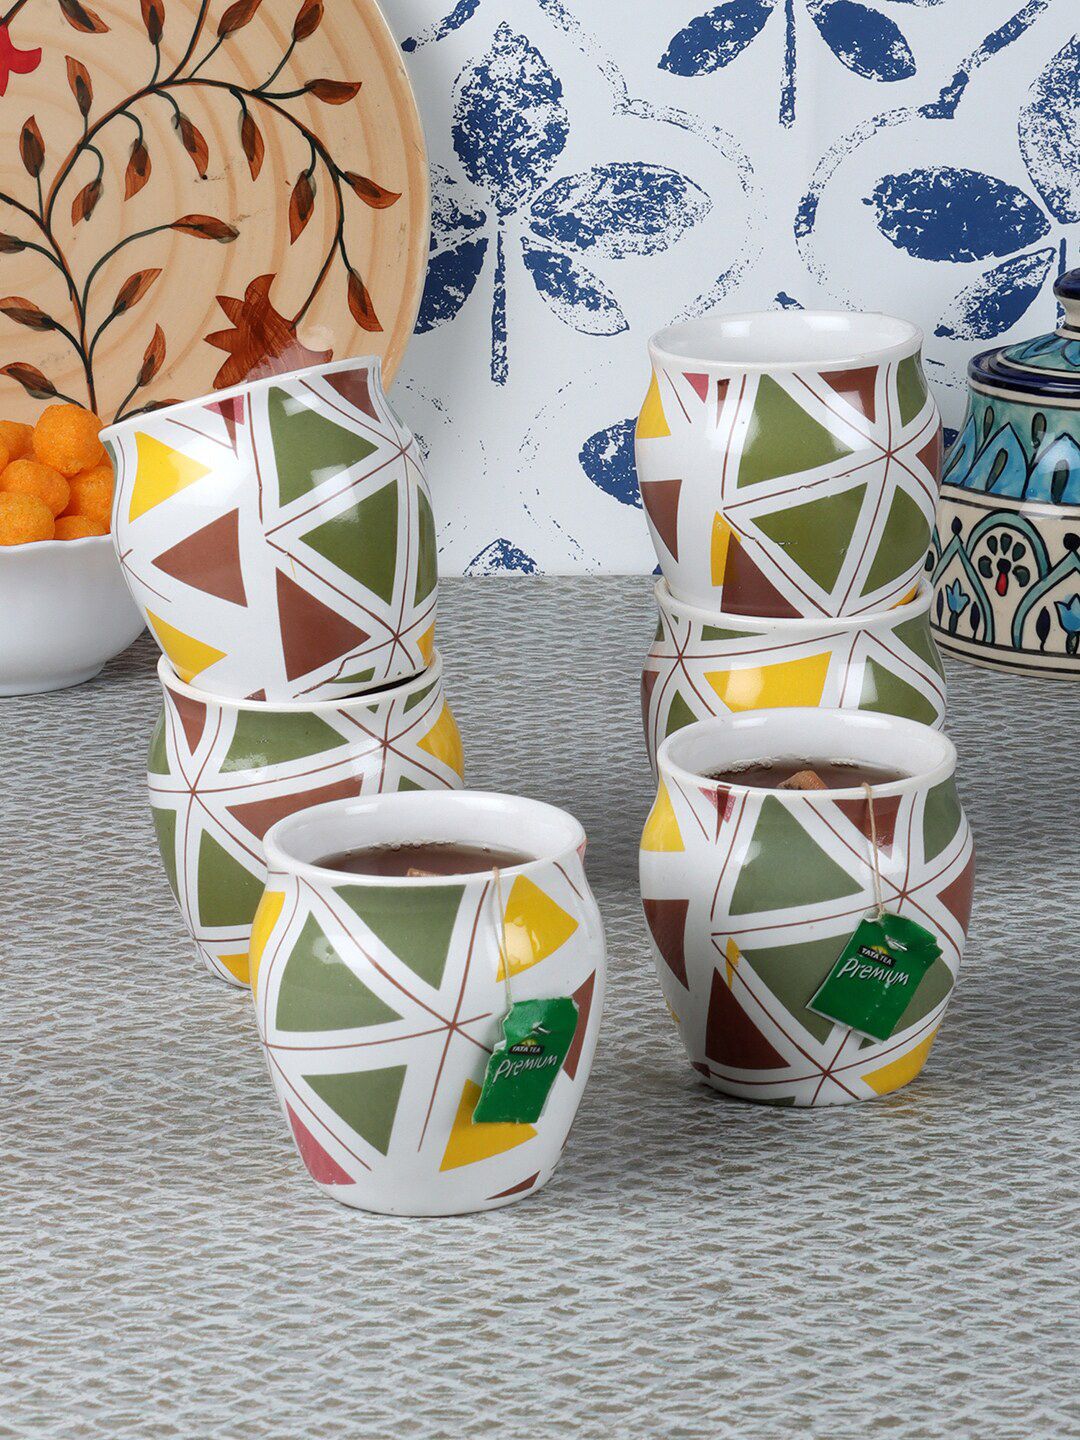 CDI Set Of 7 White & Brown Geometric Printed Ceramic Glossy Kulladhs With Wooden Tray Price in India